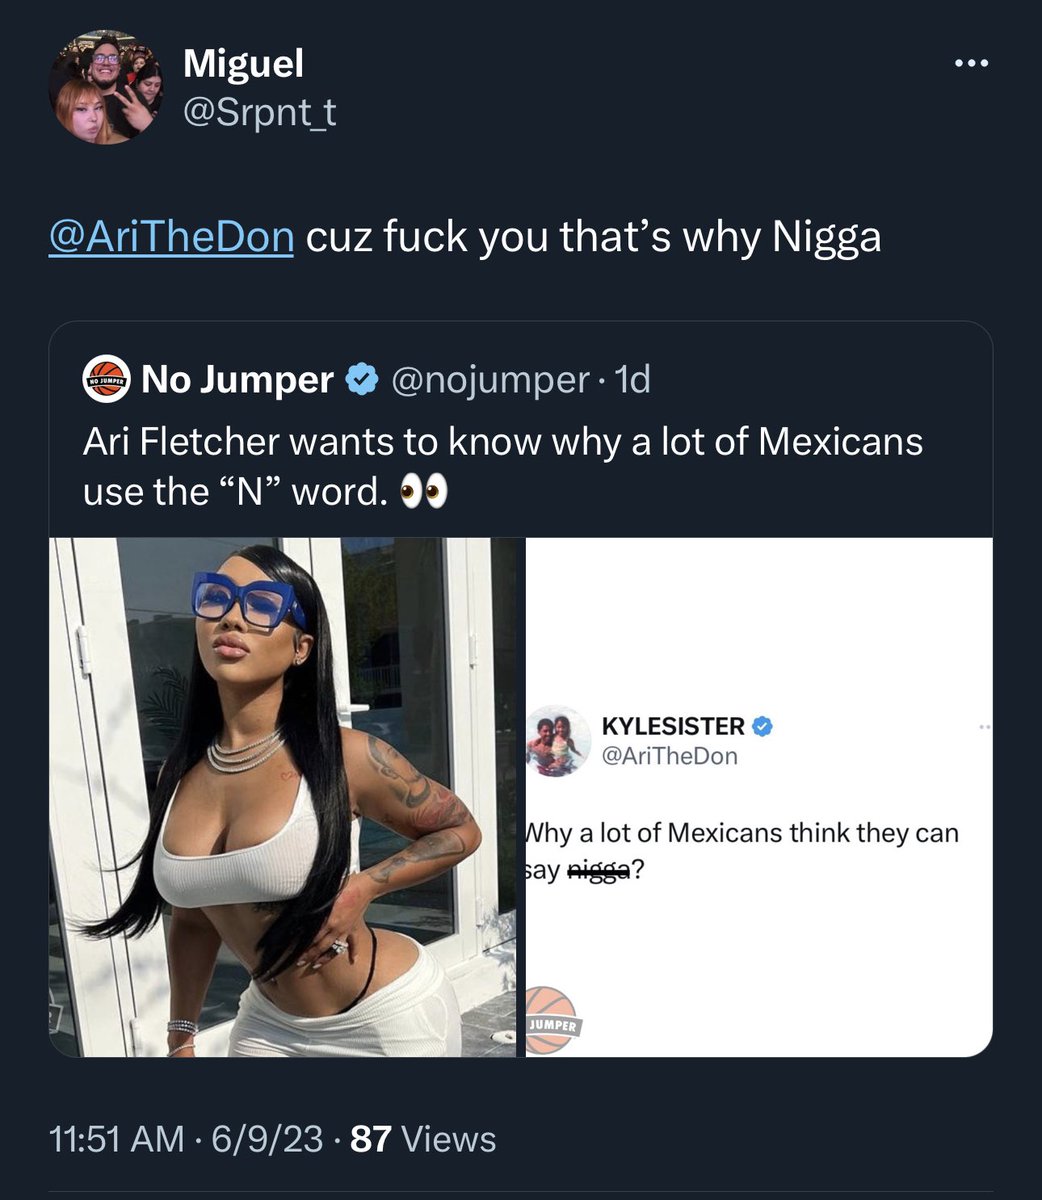 Her wrong choice of words aside, I have a question now for Hispanic people who use the N word. I grew up with a lot of Latin people am I allowed to use yalls slurs too cause “it ain’t that deep” right?